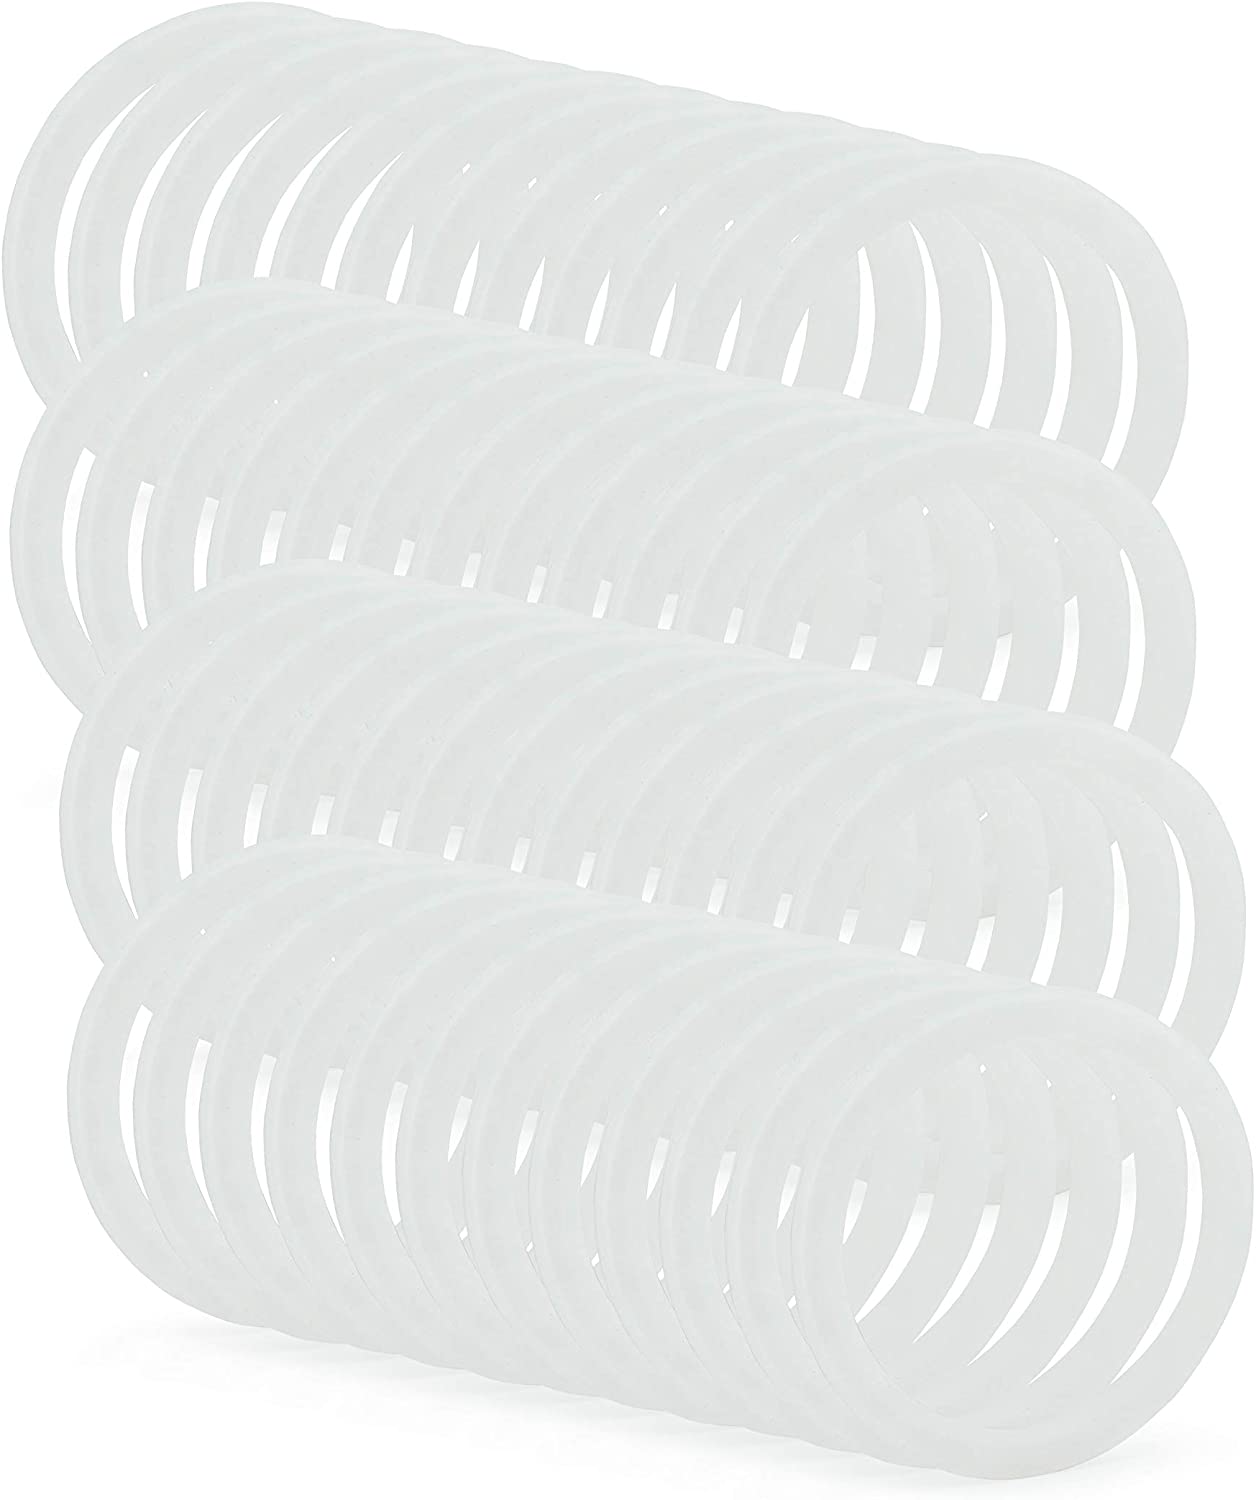 Silicone Seal Rings for Mason Jar Lids (Wide Mouth, Case of 2400) - SH_1465_CASE